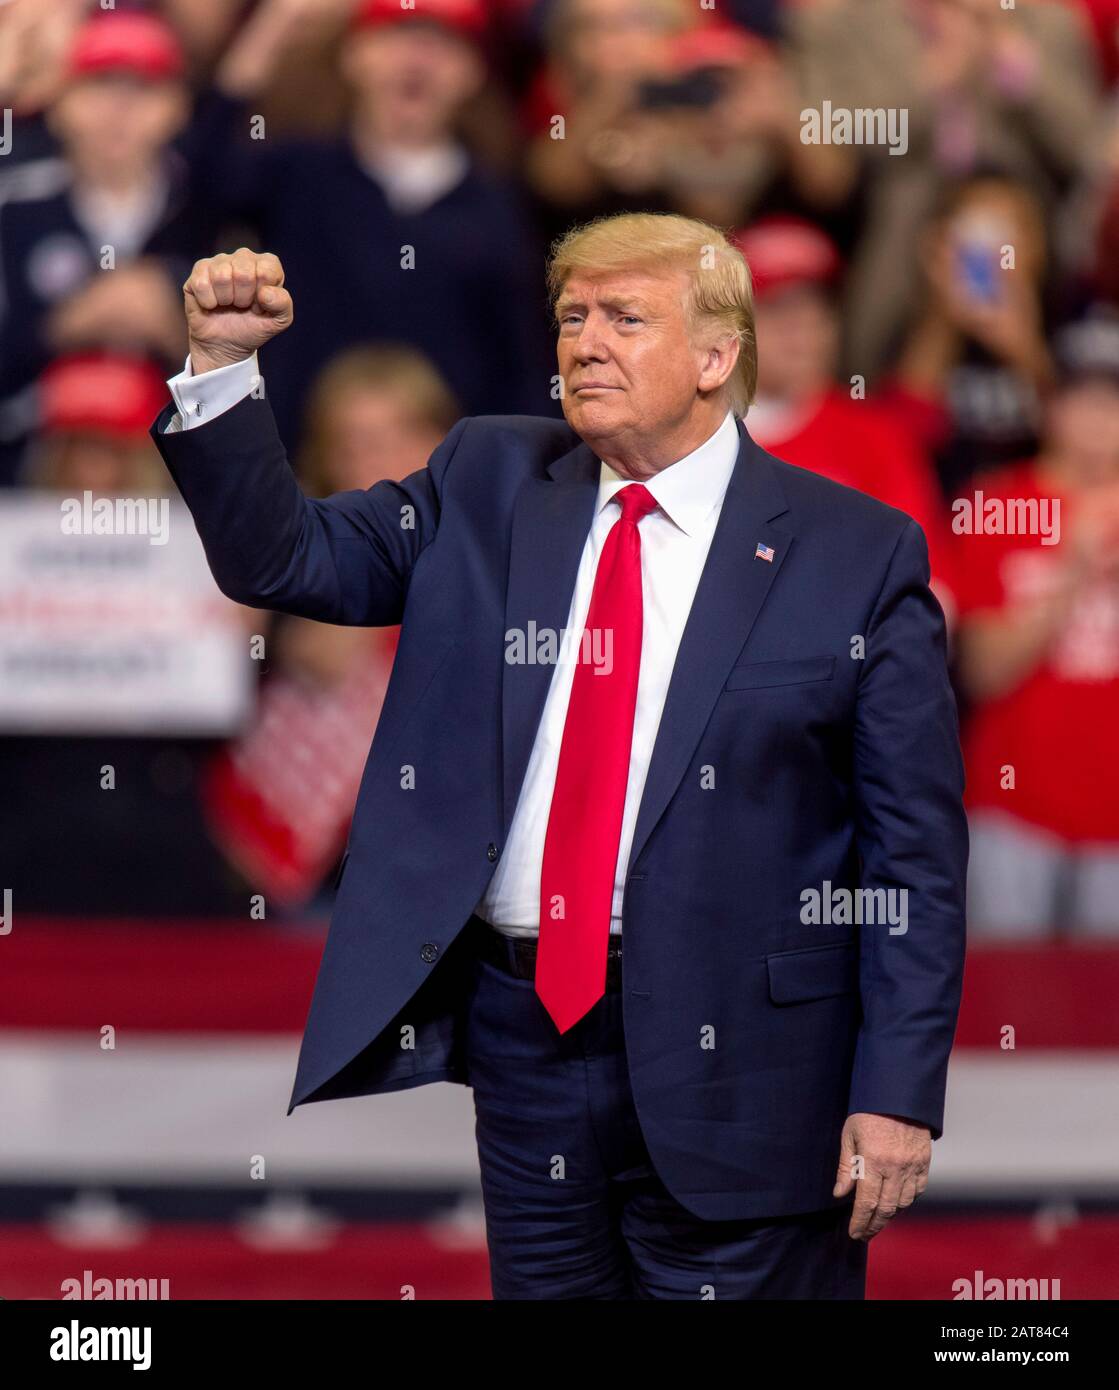 Jan.30, 2020 - Des Moines, Iowa, USA: President DONALD TRUMP holds a Keep America Great Rally at Drake University. The United State Senate is currently conducting an impeachment trial in Washington, DC which will determine whether Trump should be removed from office for abuse of power and obstruction of Congress. Credit: Brian Cahn/ZUMA Wire/Alamy Live News Stock Photo